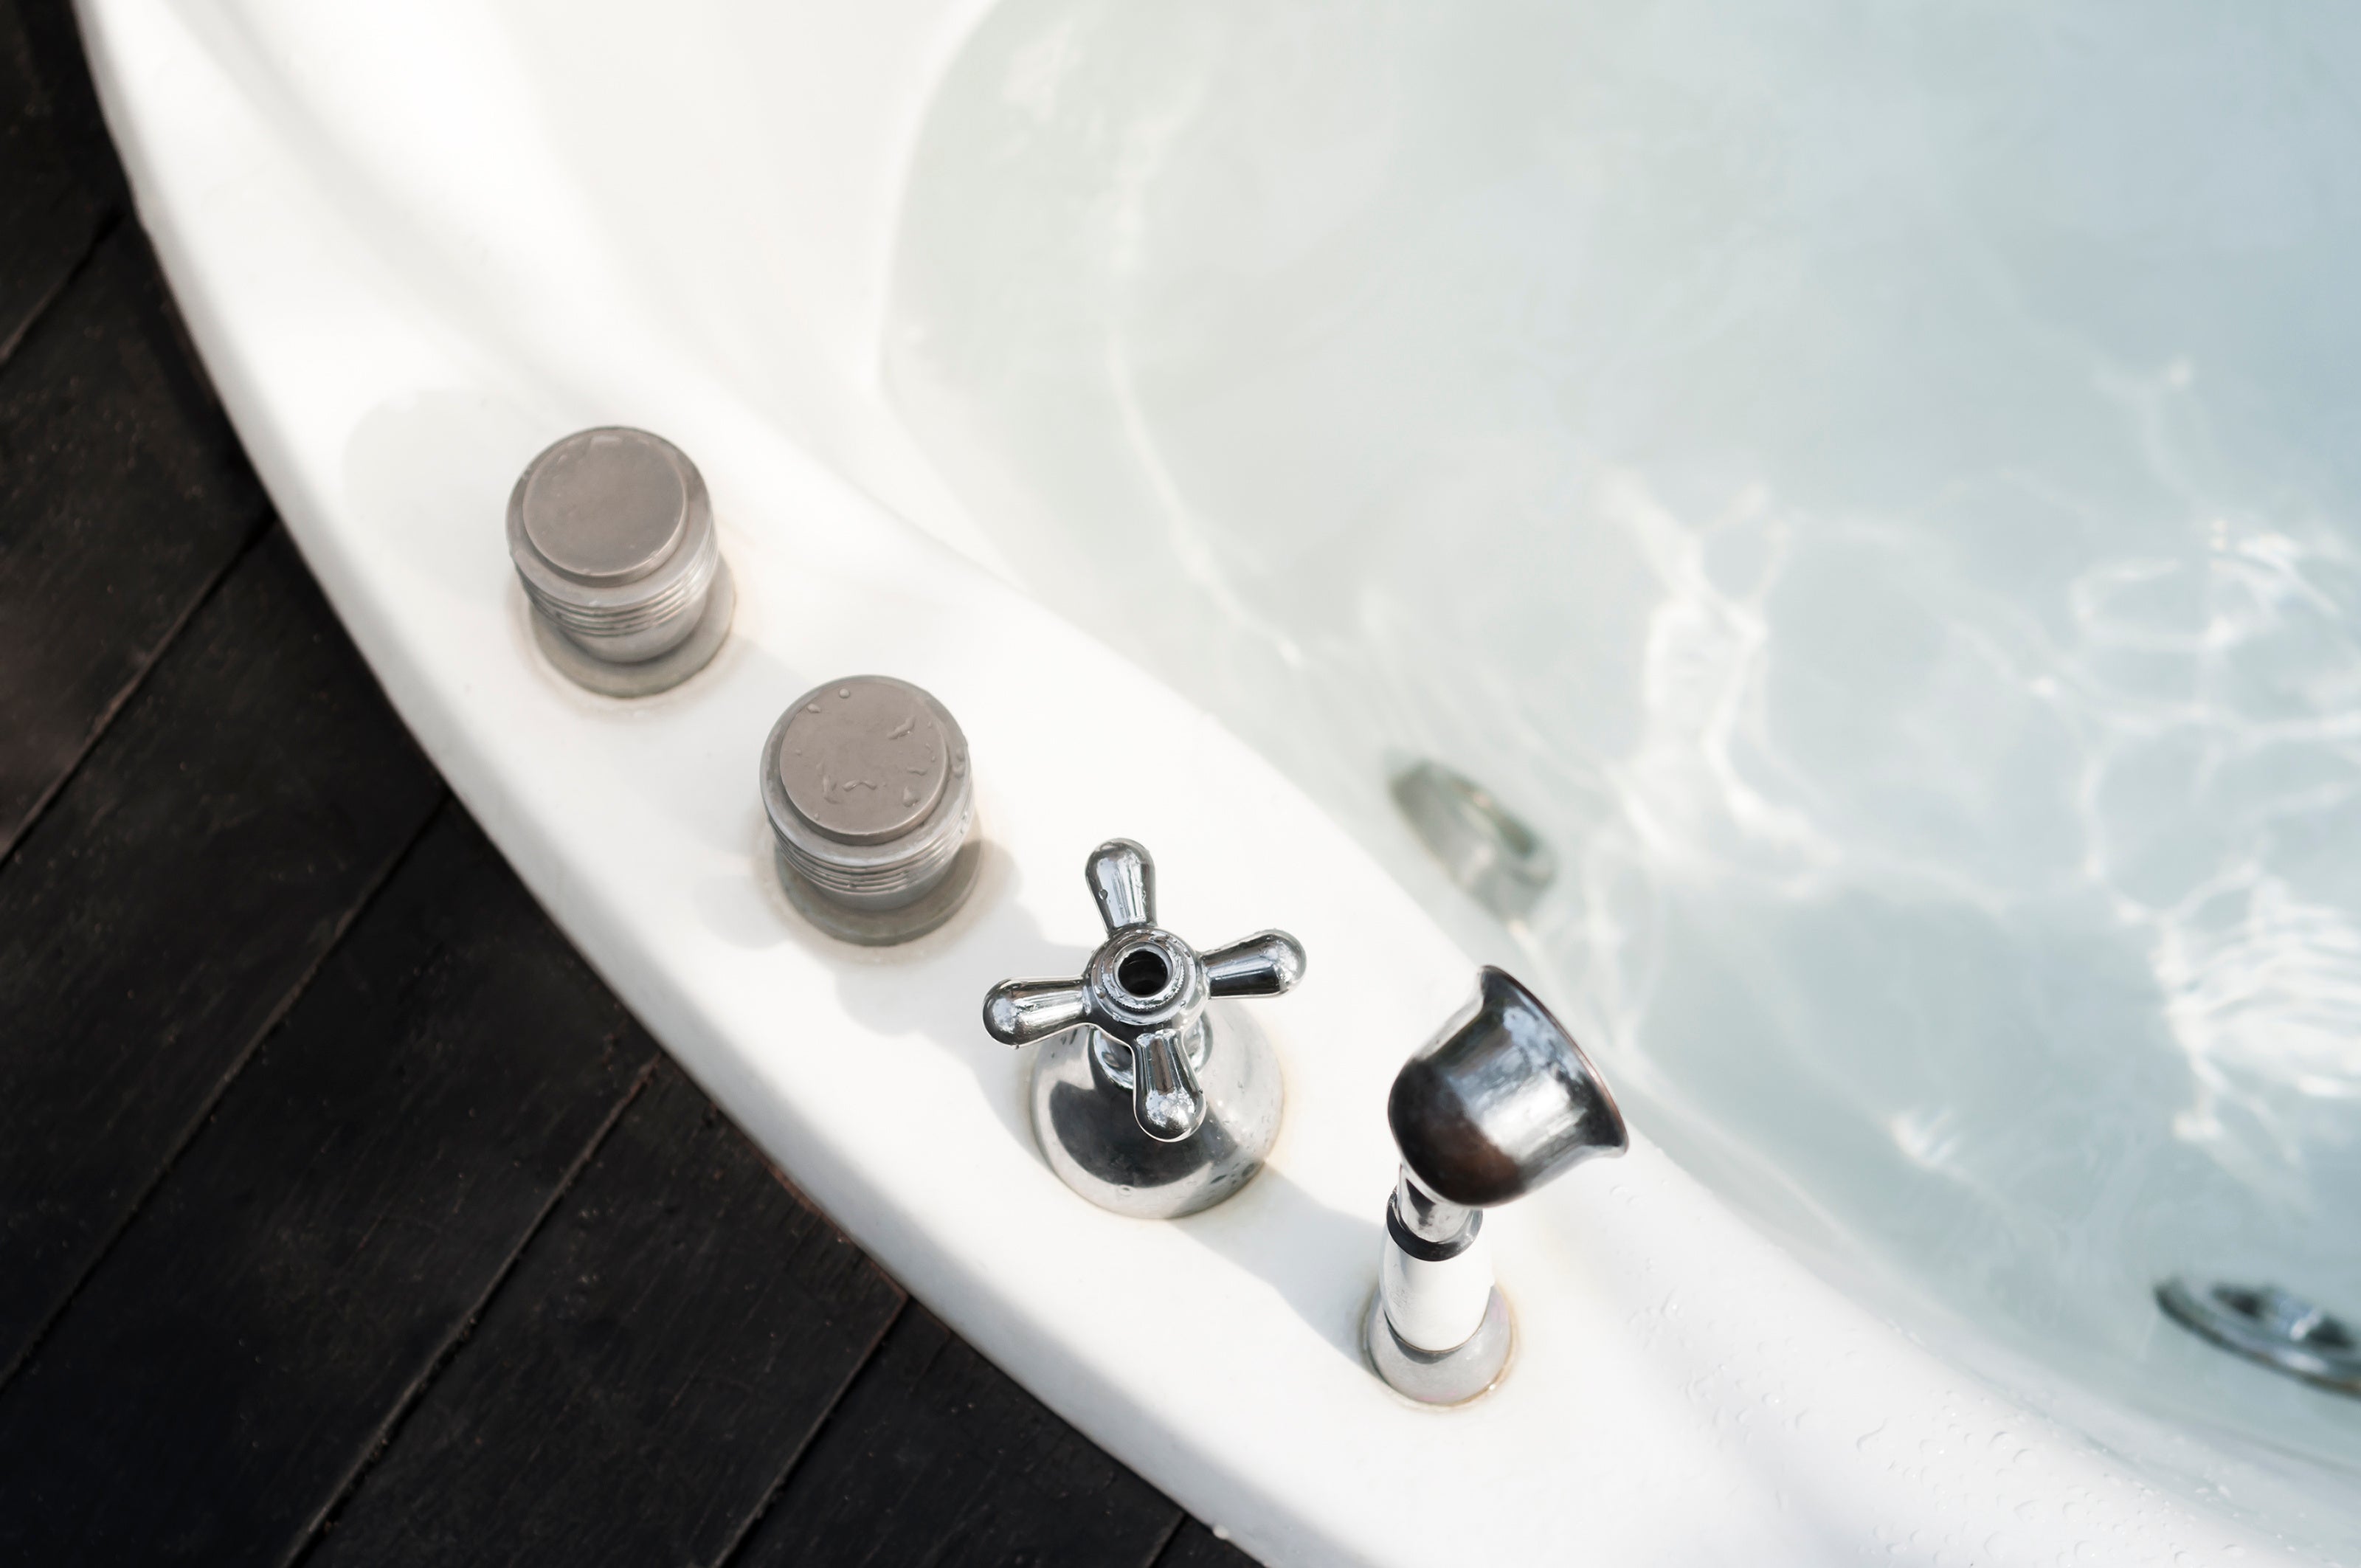 Can Walk-In Bathtubs Provide Therapeutic Benefits For Your Health?